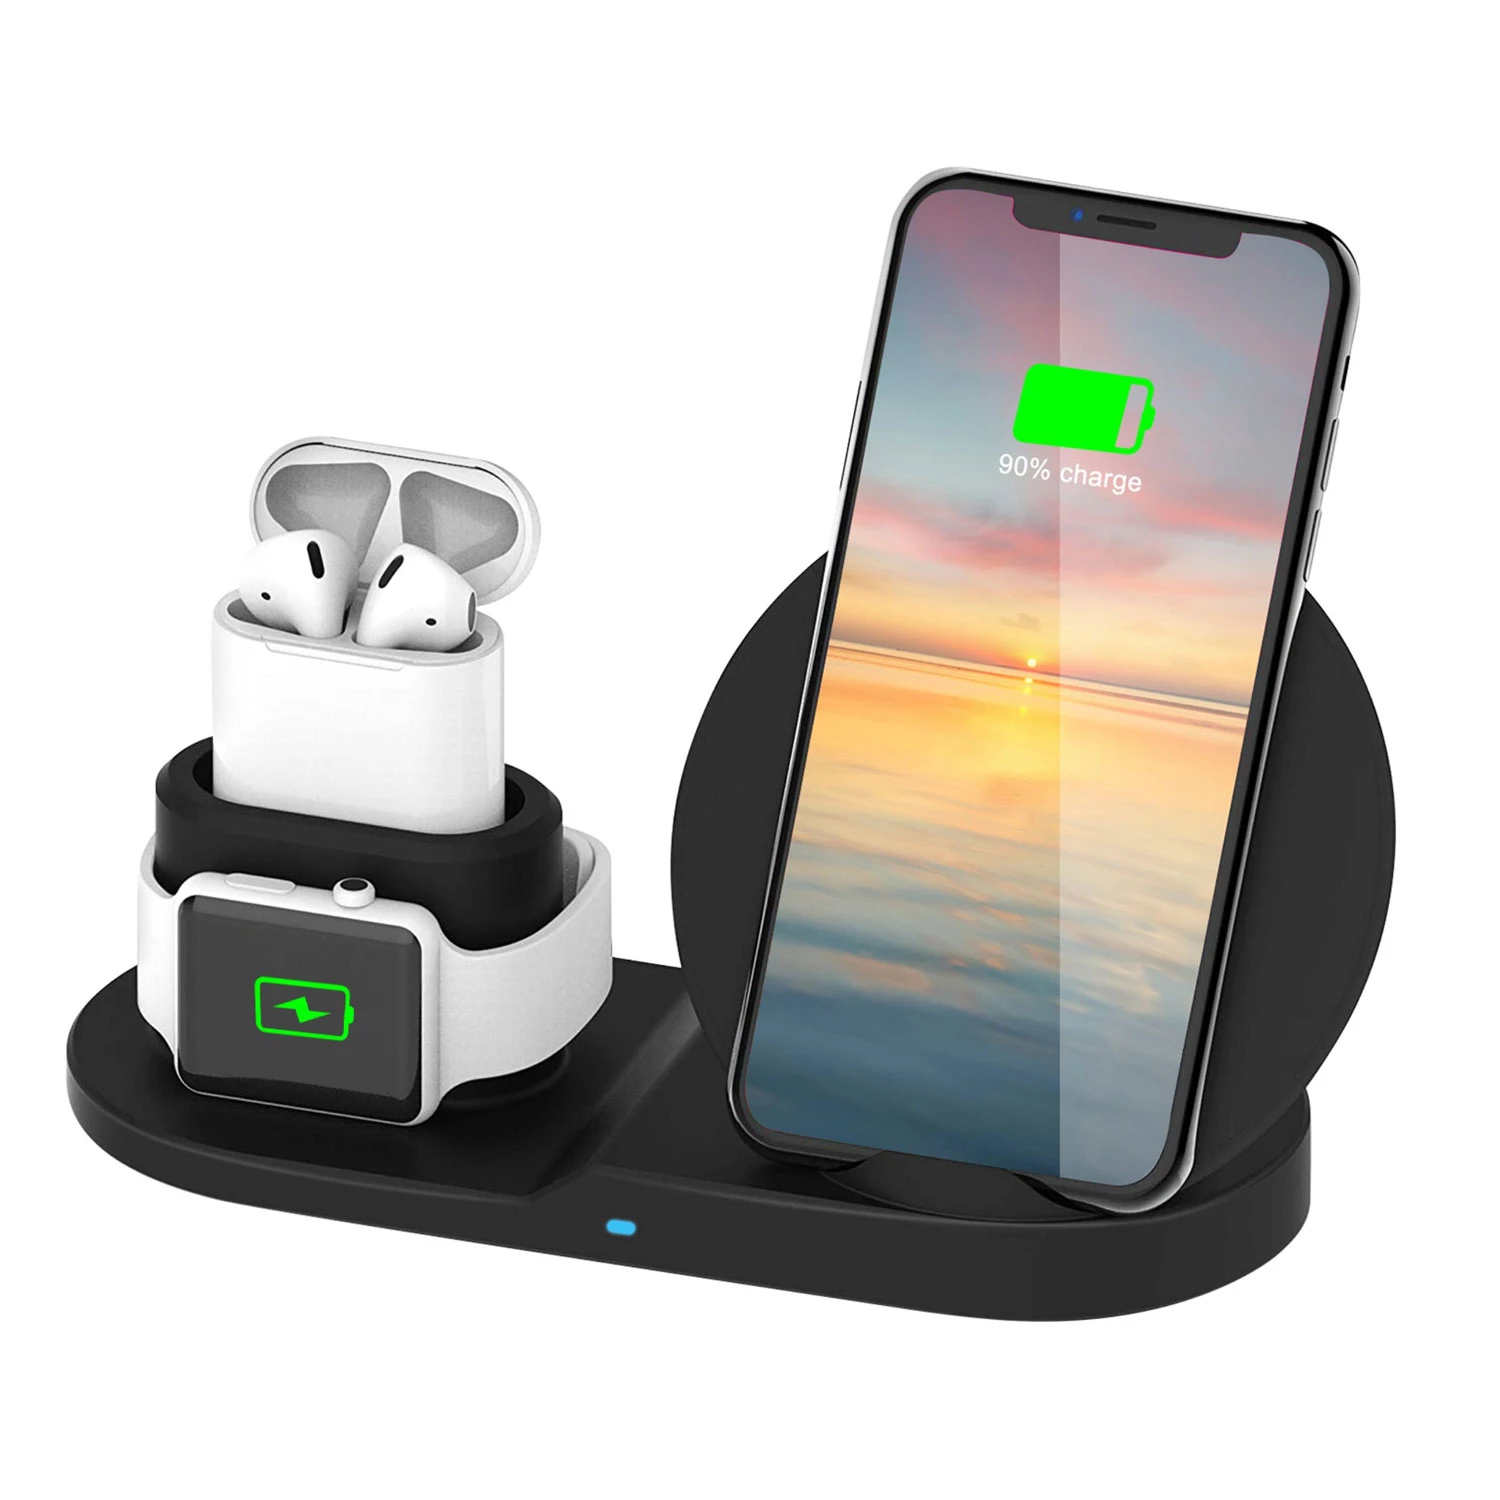 10W Fast Wireless Charger for iPhone, iWatch, AirPods - Fits iPhone 11/11Pro/XS/XR/MAX/X/8 Plus/8, S